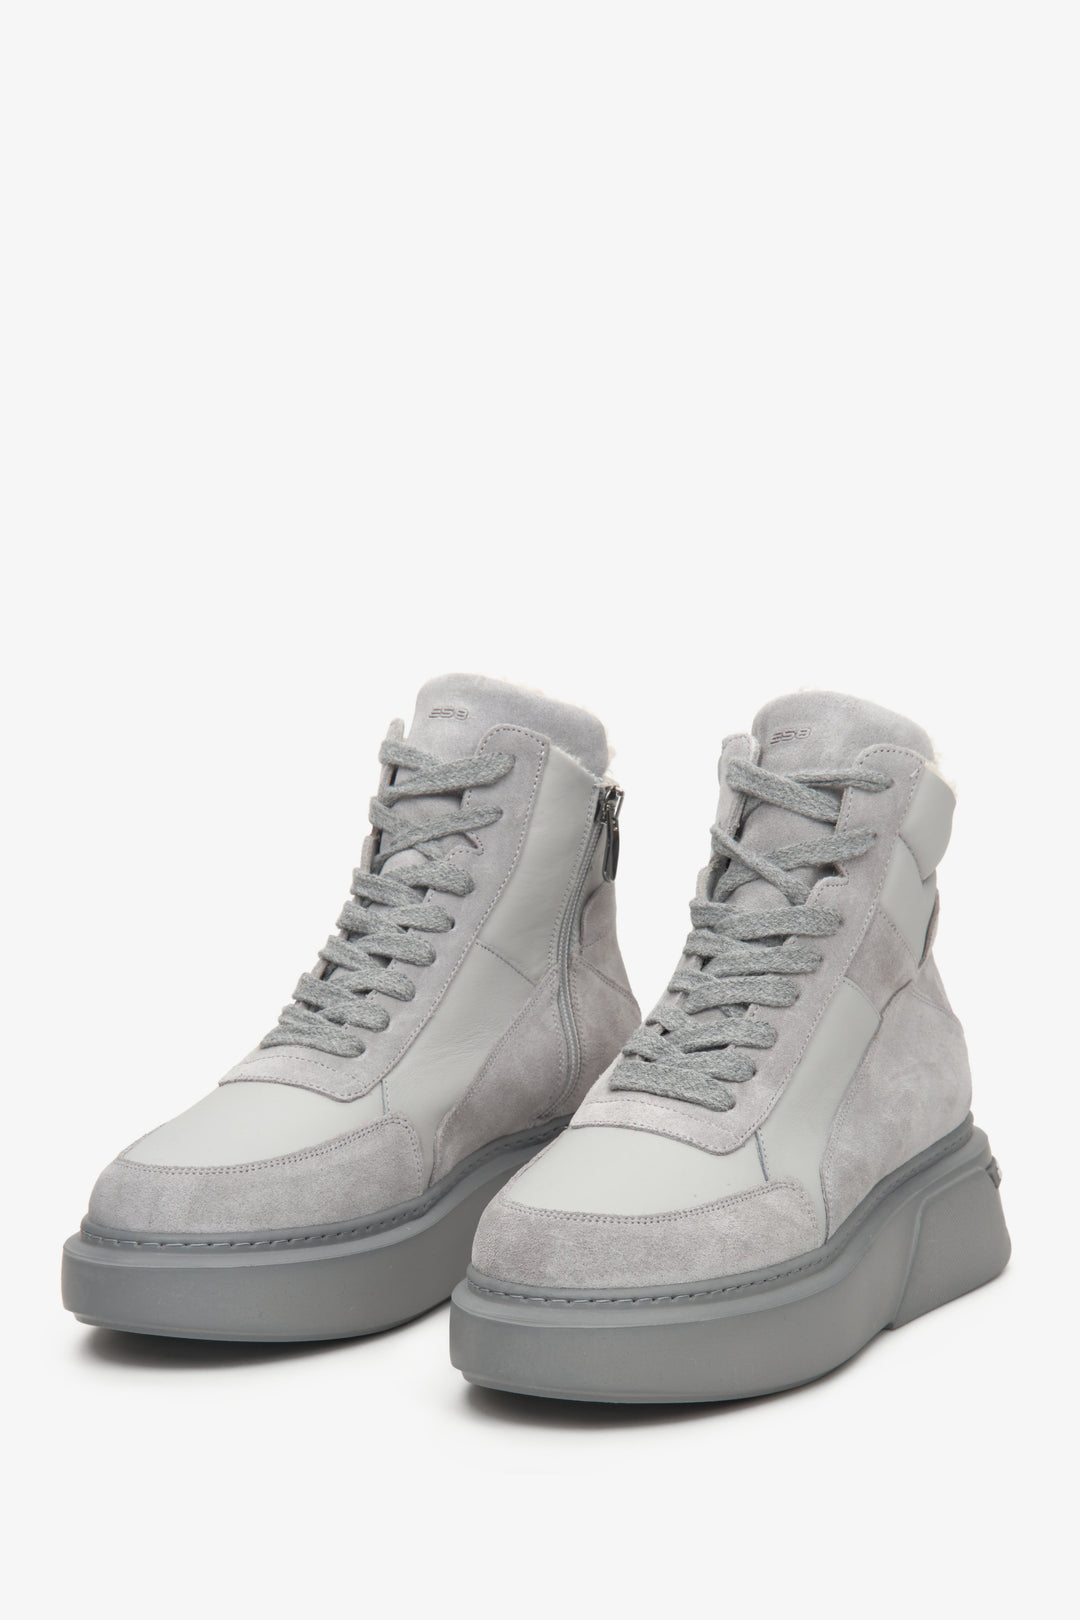 Women's fashion grey high top sneakers by ES 8.